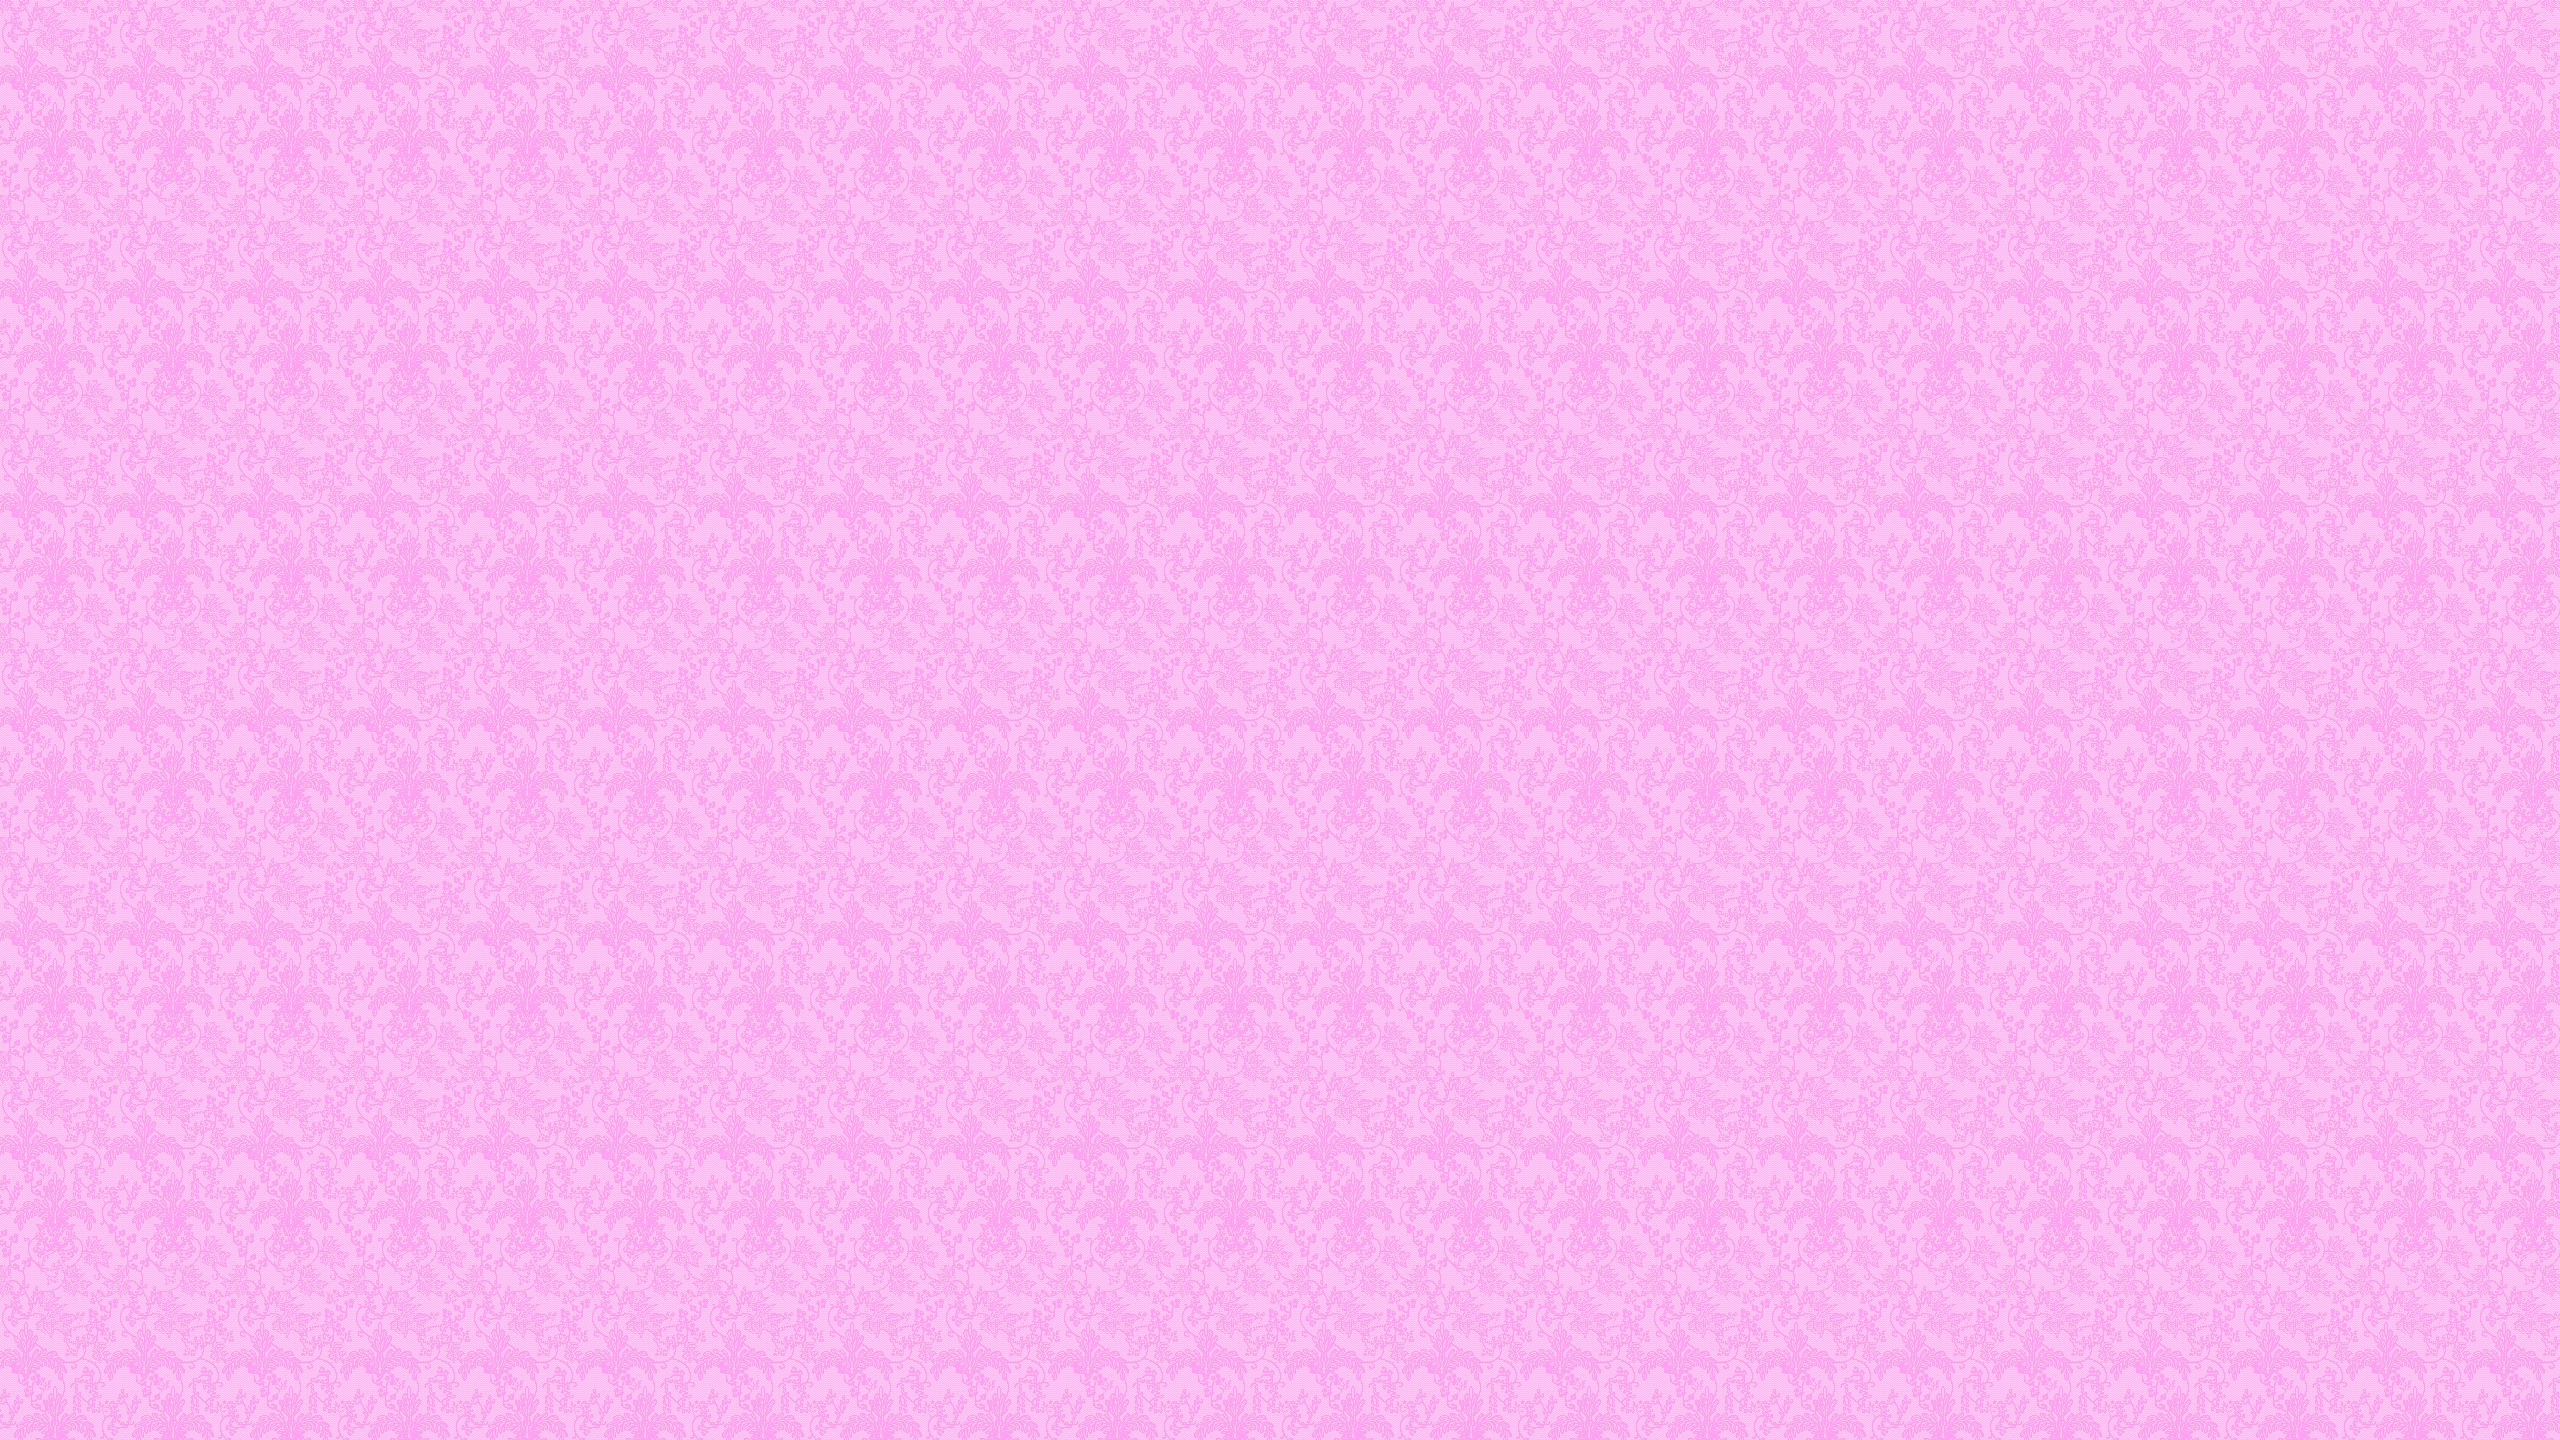 This Pink Vintage Desktop Wallpaper Is Easy Just Save The